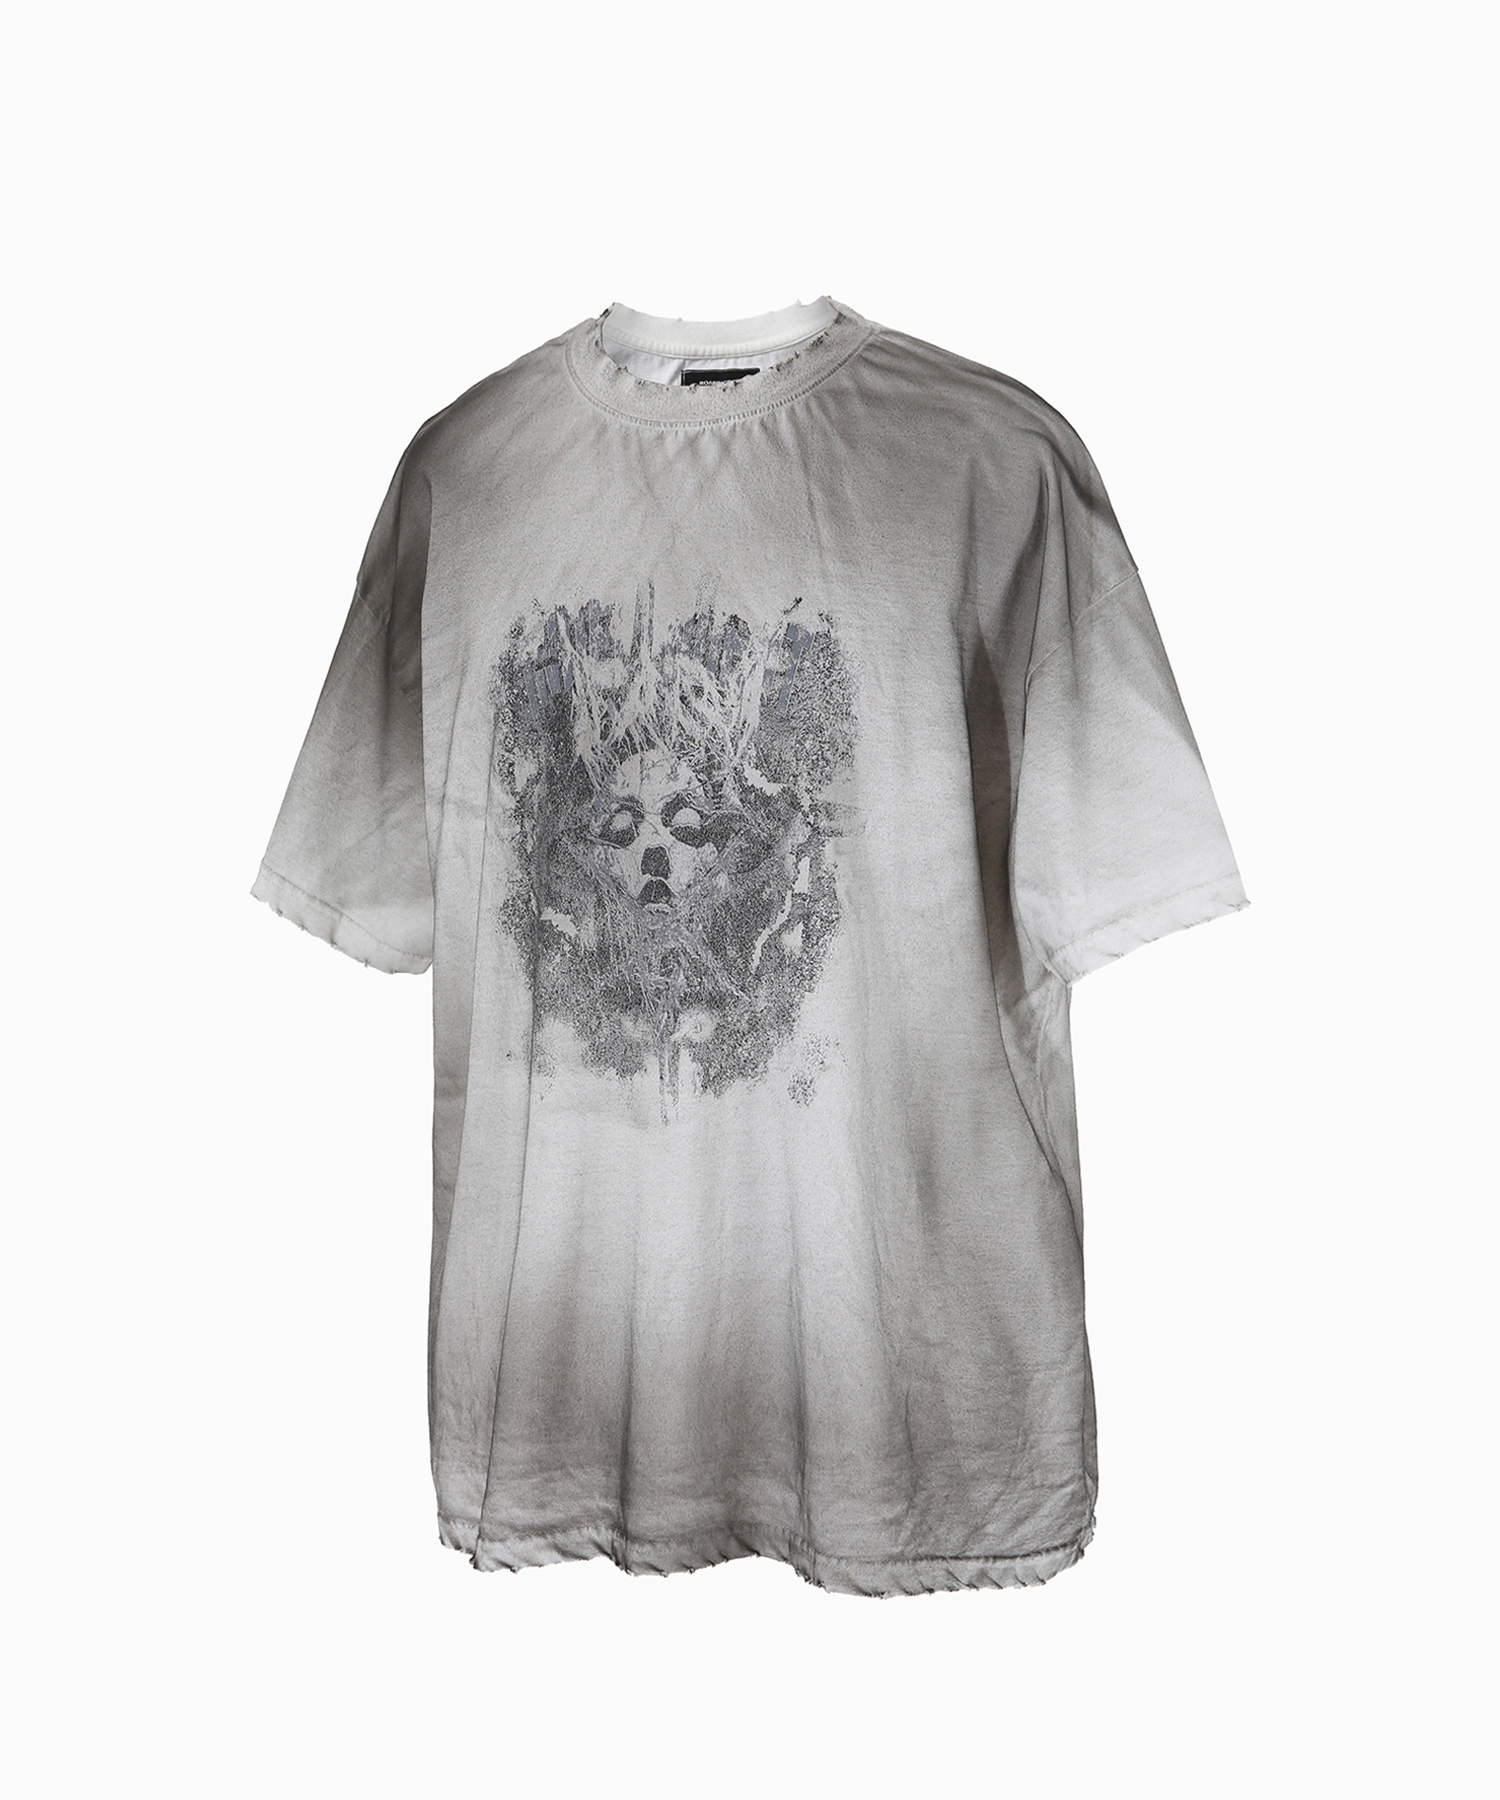 Independent washed over t-shirt-Dirty white - 로어링라드(ROARINGRAD)